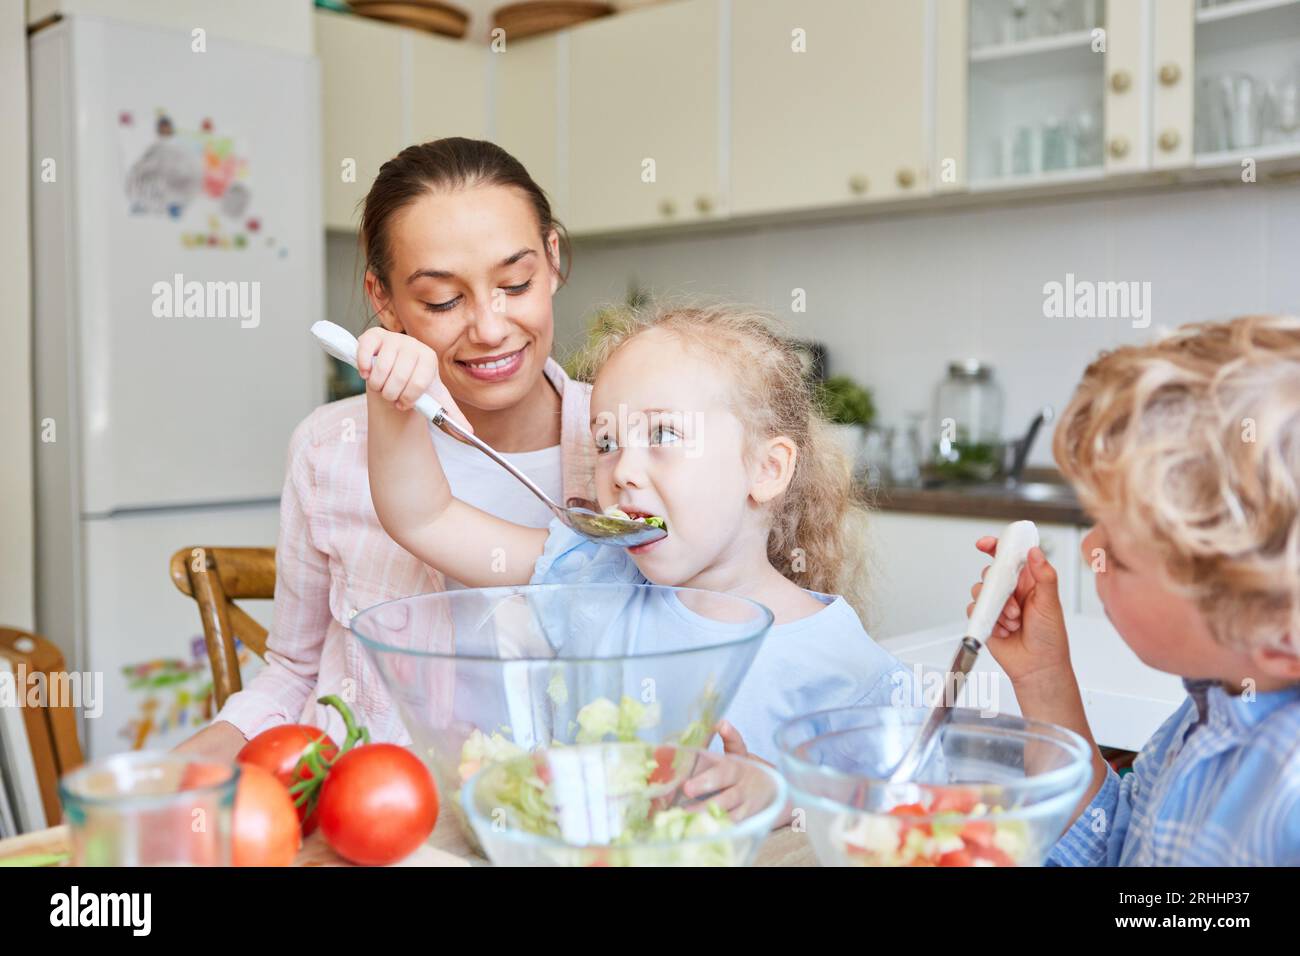 Daughter eating vegetable salad using spork with mother and brother in kitchen at home Stock Photo